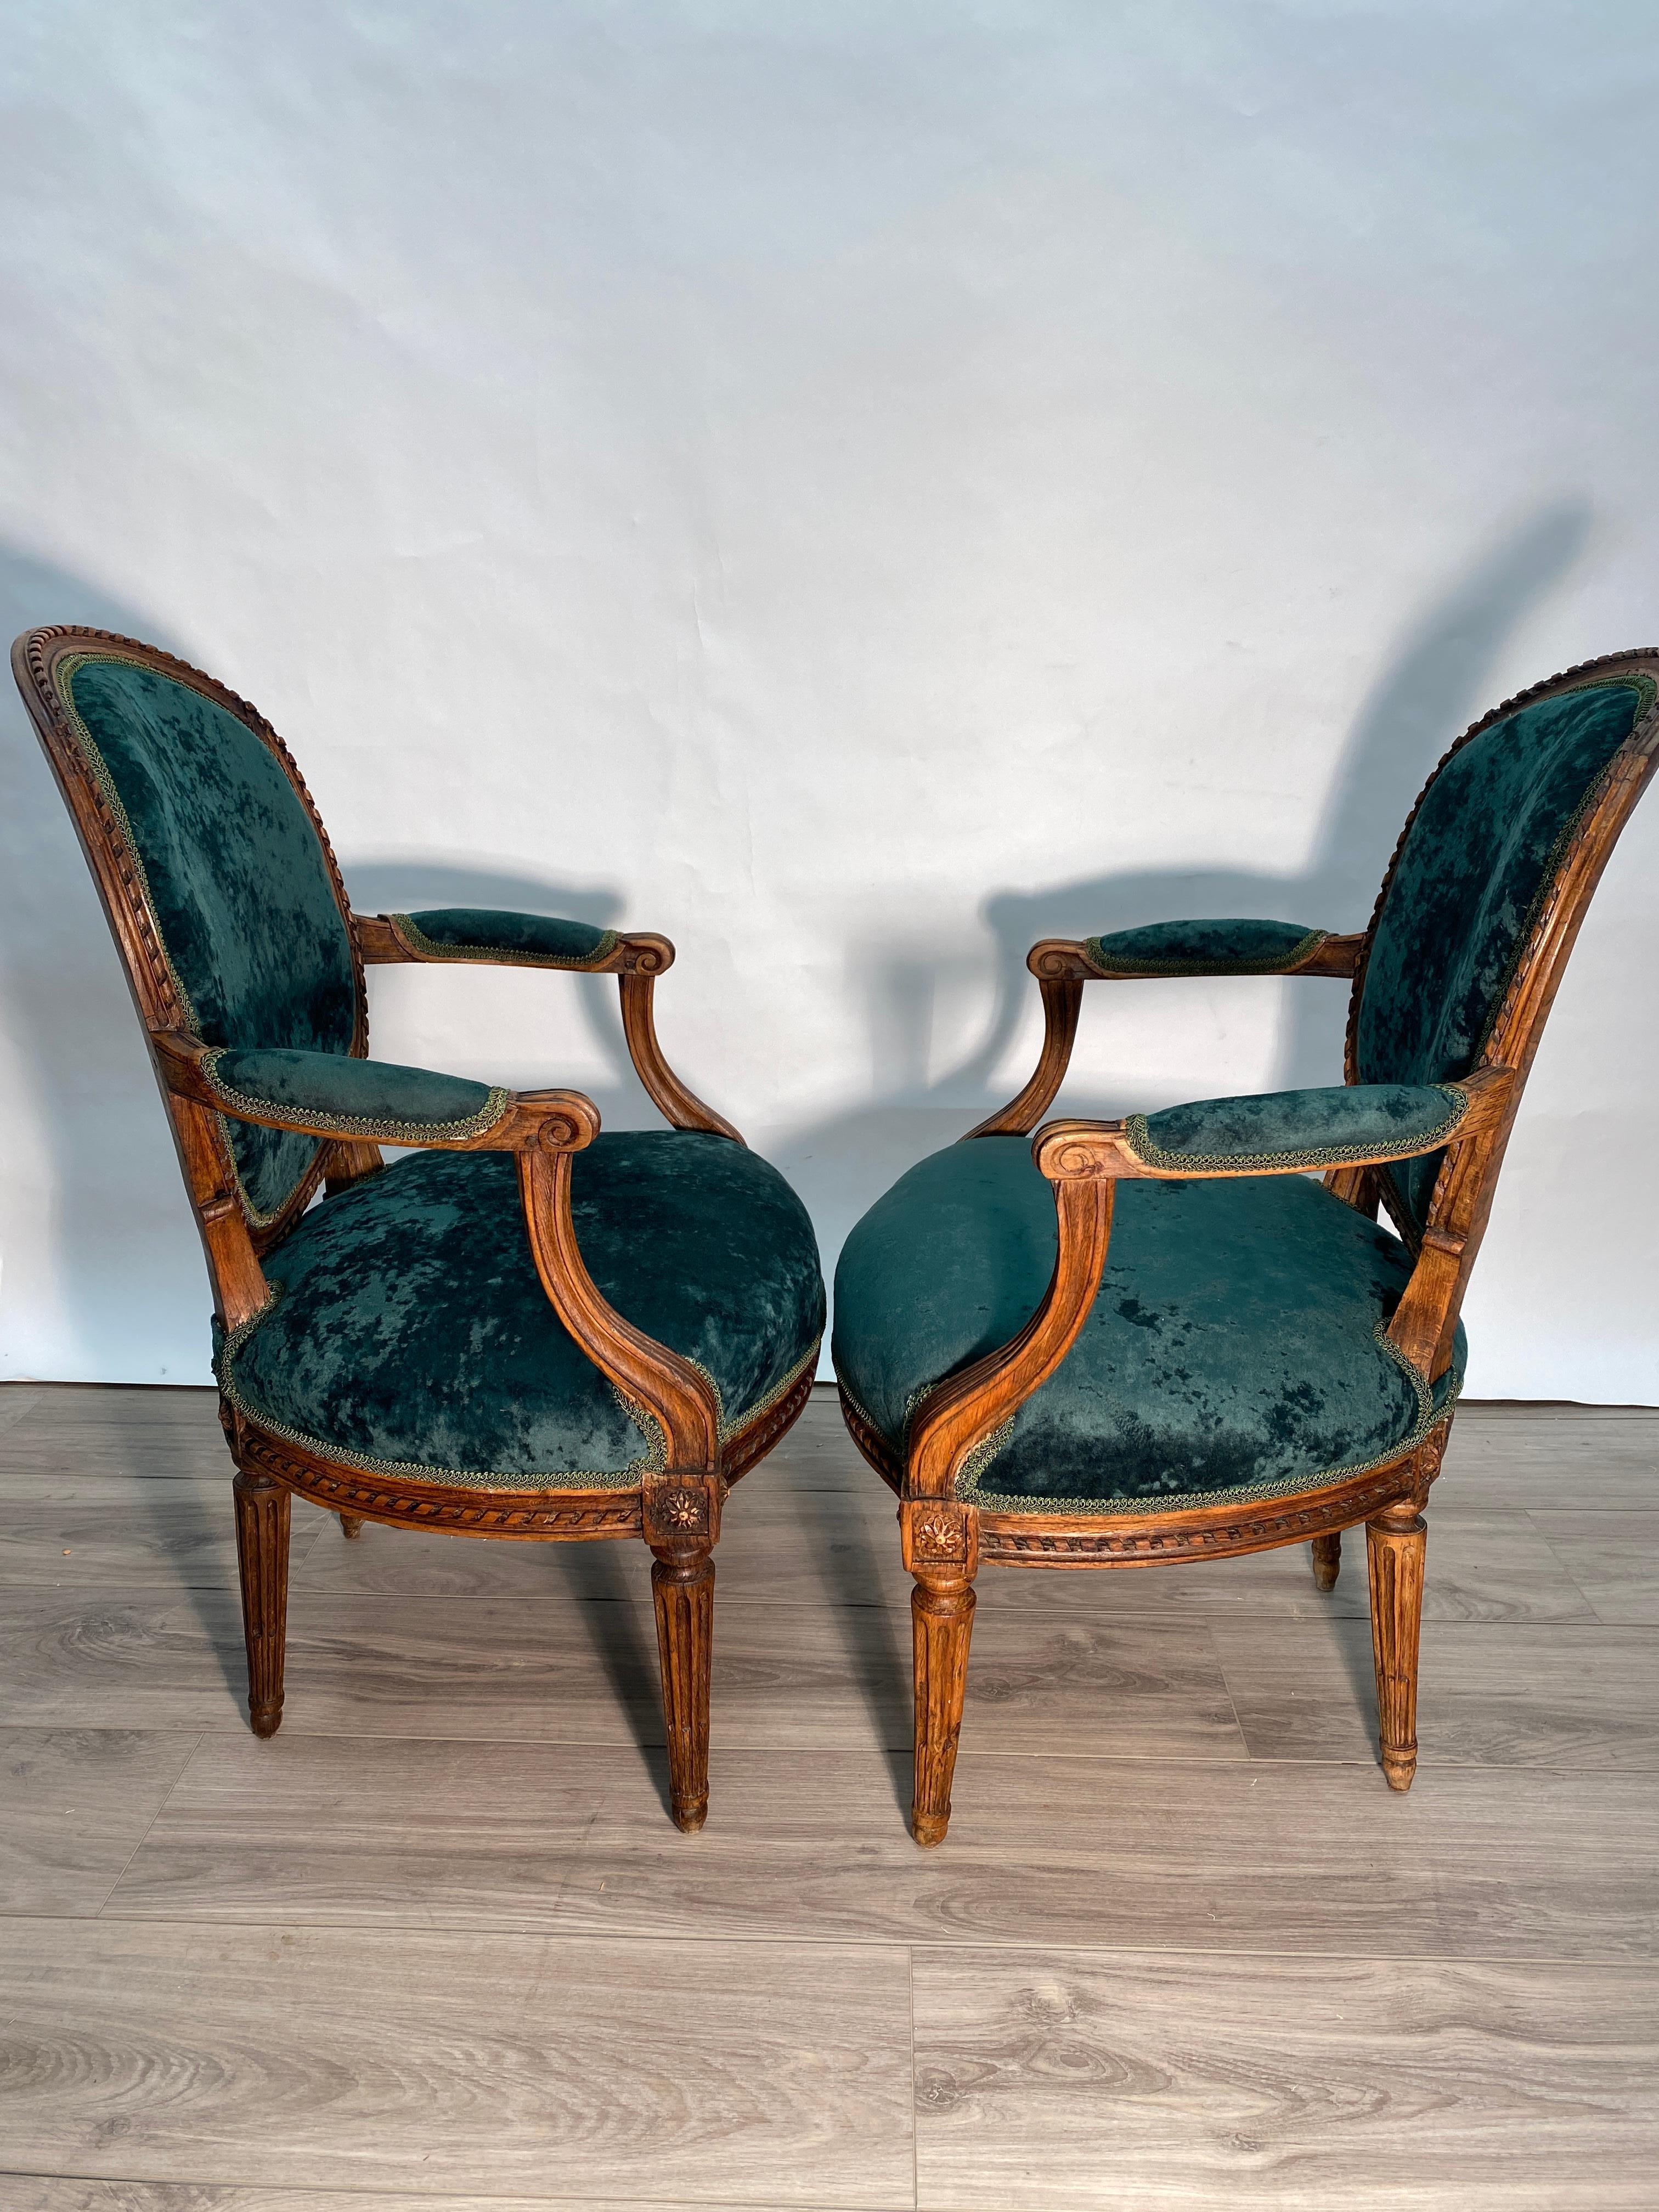 Pair of Period 18th Century French Louis XVI Walnut Fauteuil Arm Chairs For Sale 8